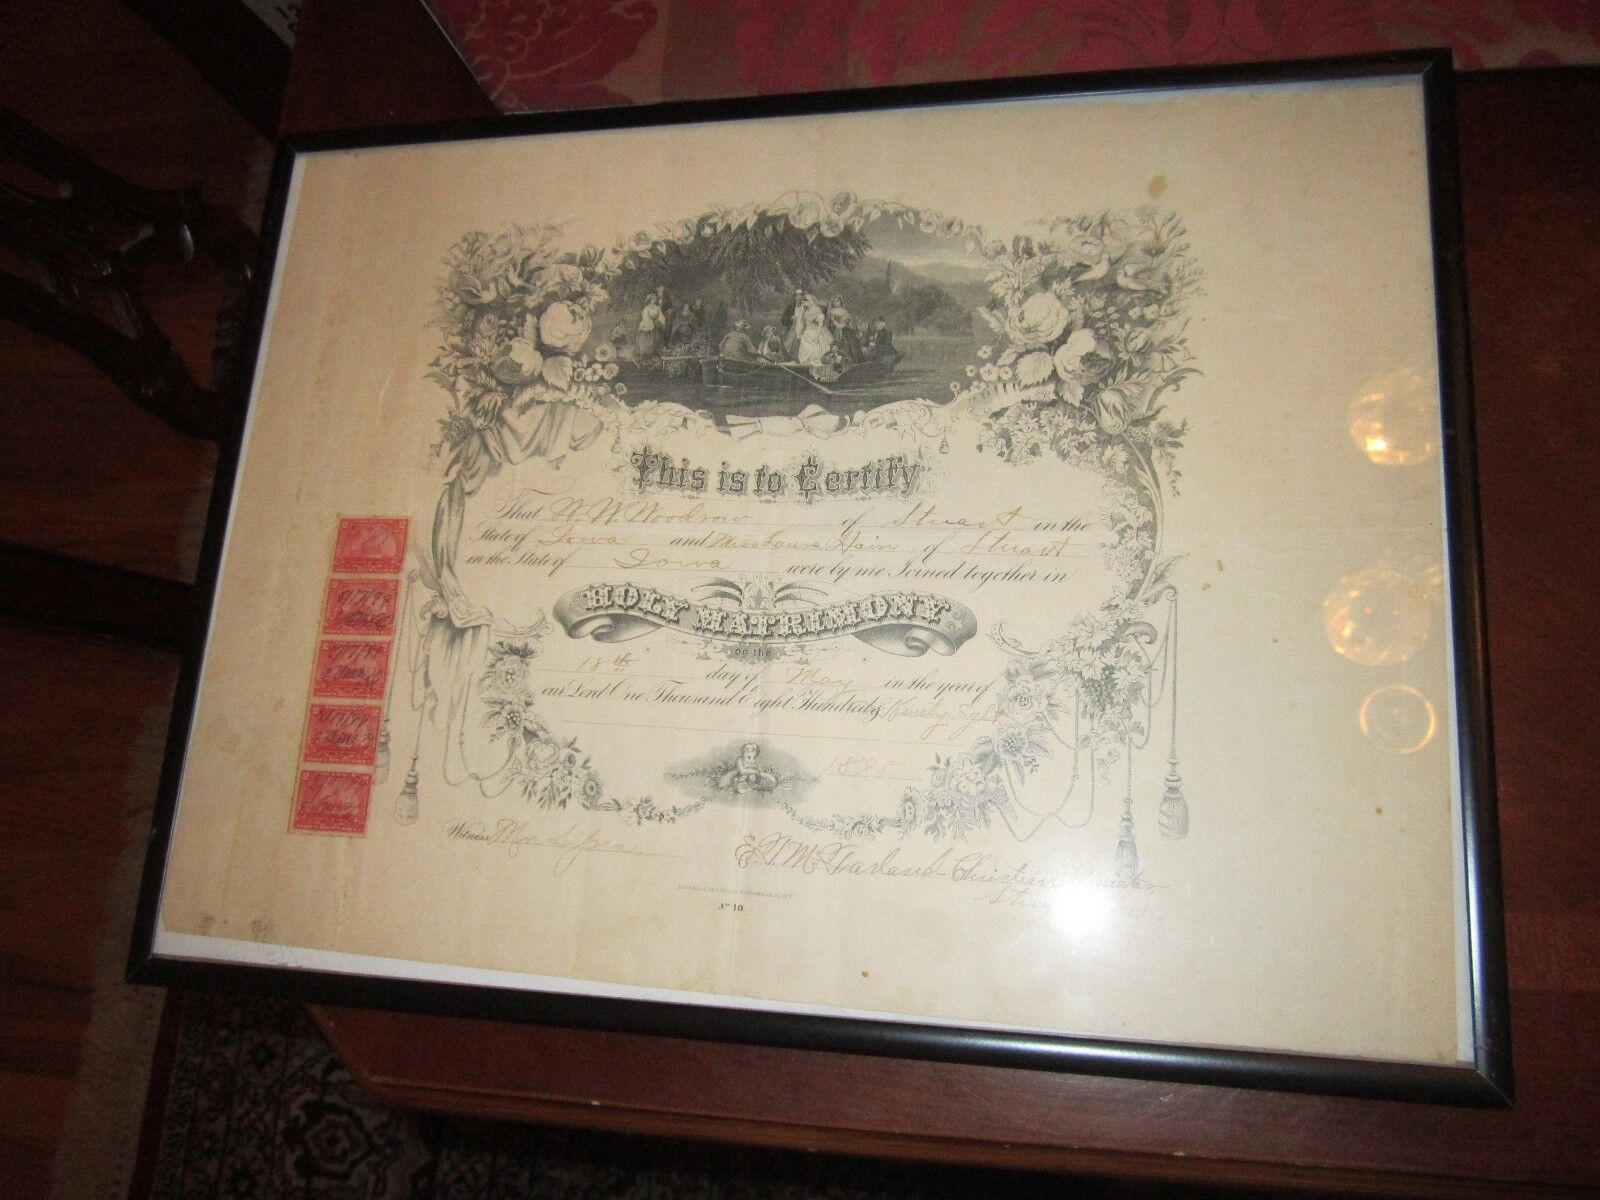 1898 MATRIMONY MARRIAGE LICENSE WITH 5 DOCUMENTARY STAMPS ATTACHED - FRAMED